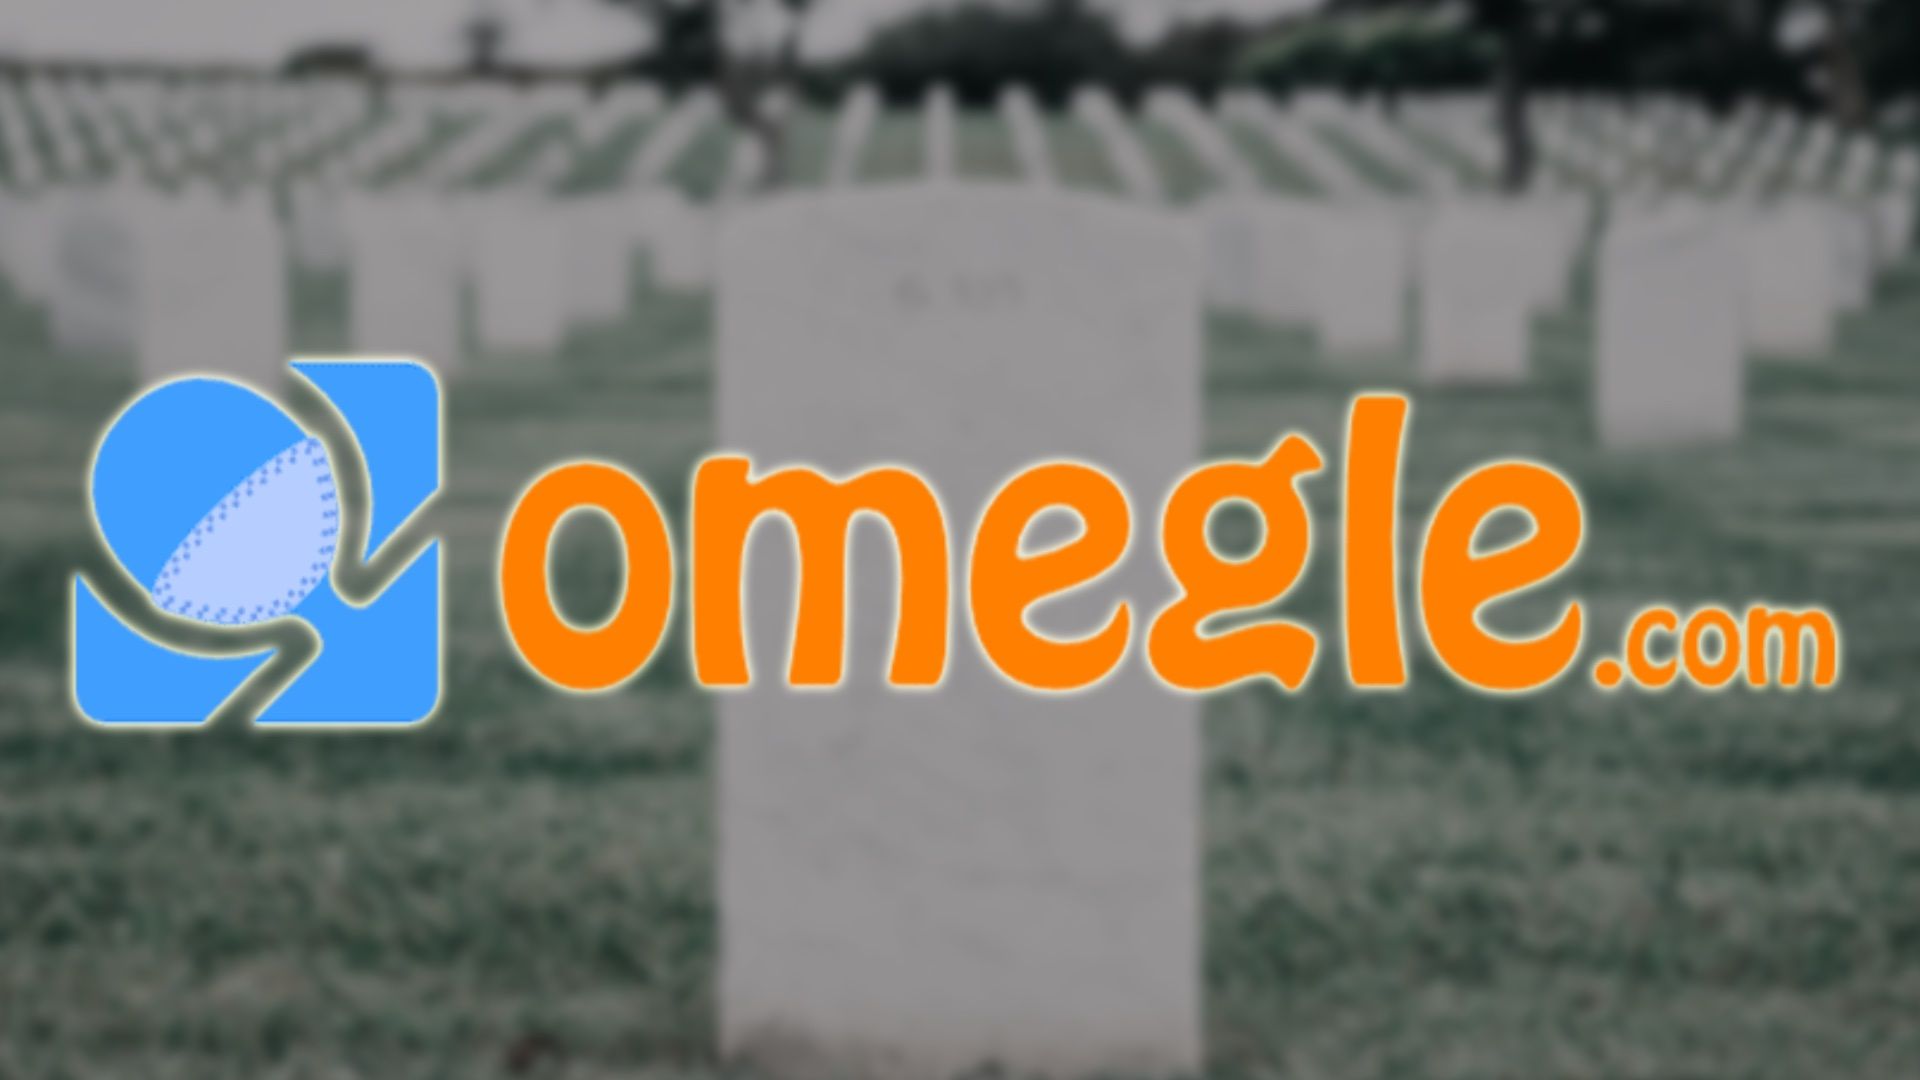 Emerald Chat vs Omegle: The Differences and Similarities